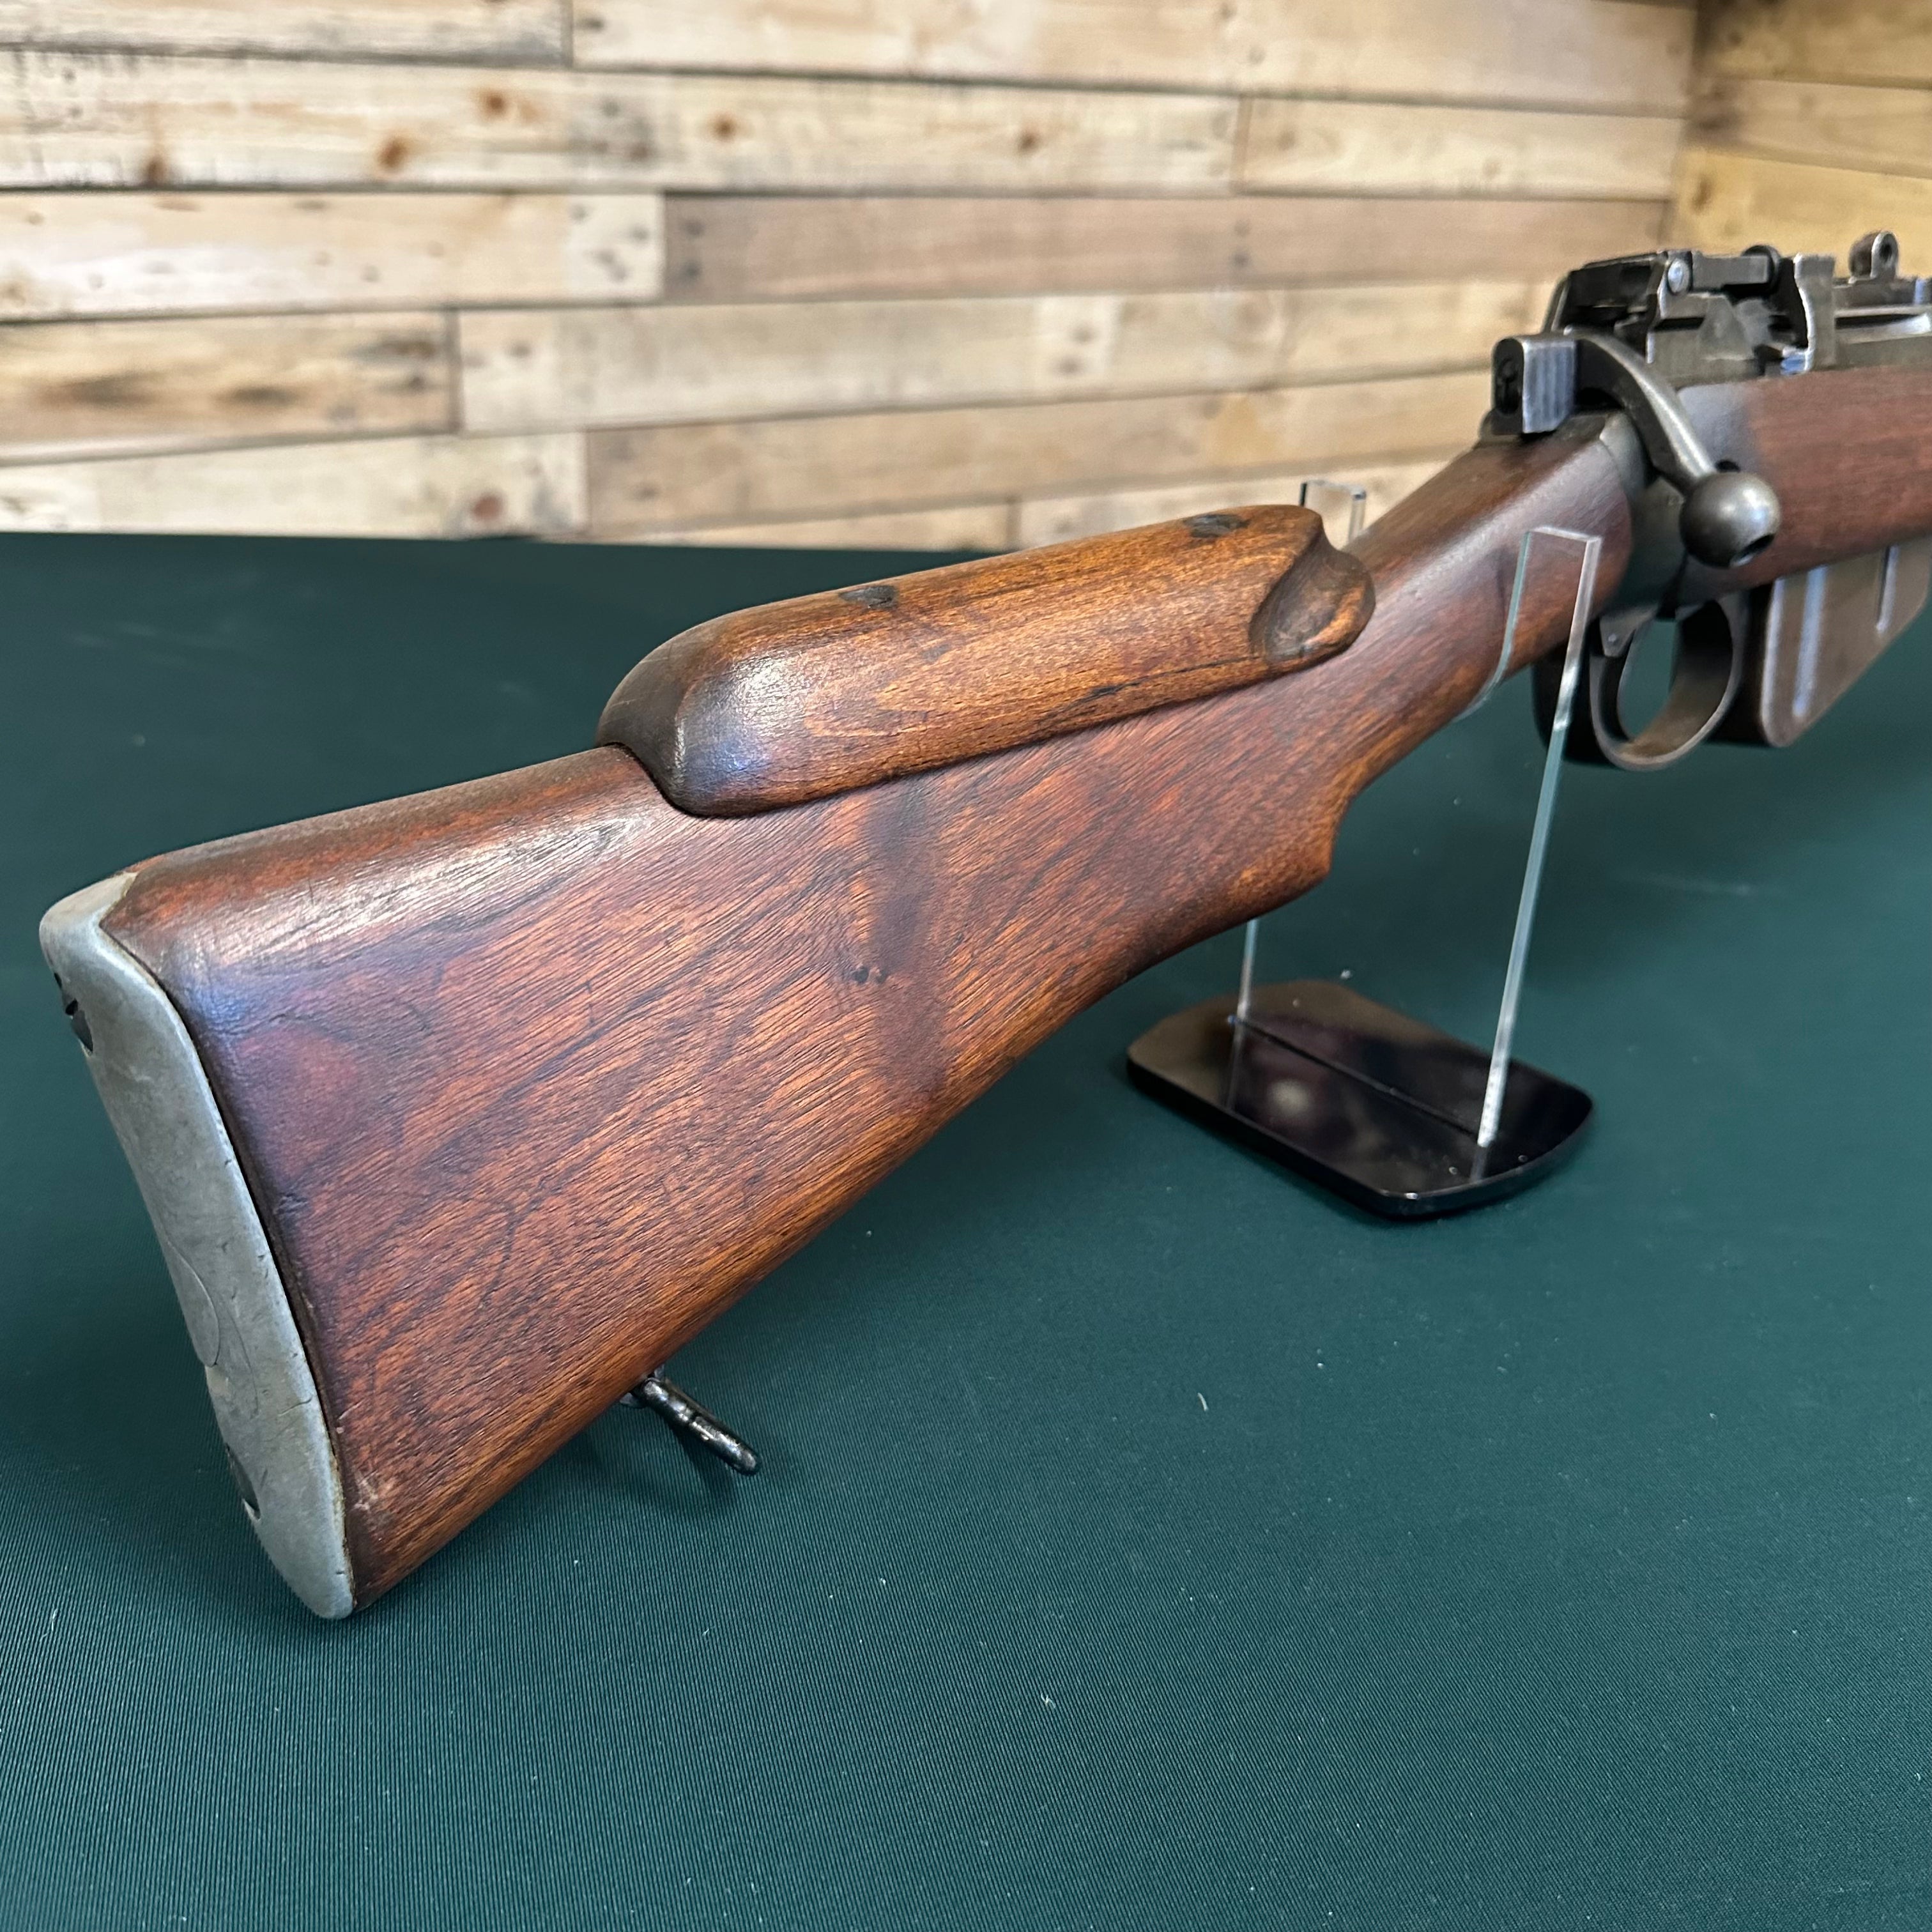 1944-BSA-Lee-Enfield-No4-Mk1T-Sniper-Rifle-with-No.32-MkII-scope-RPI-Supplies